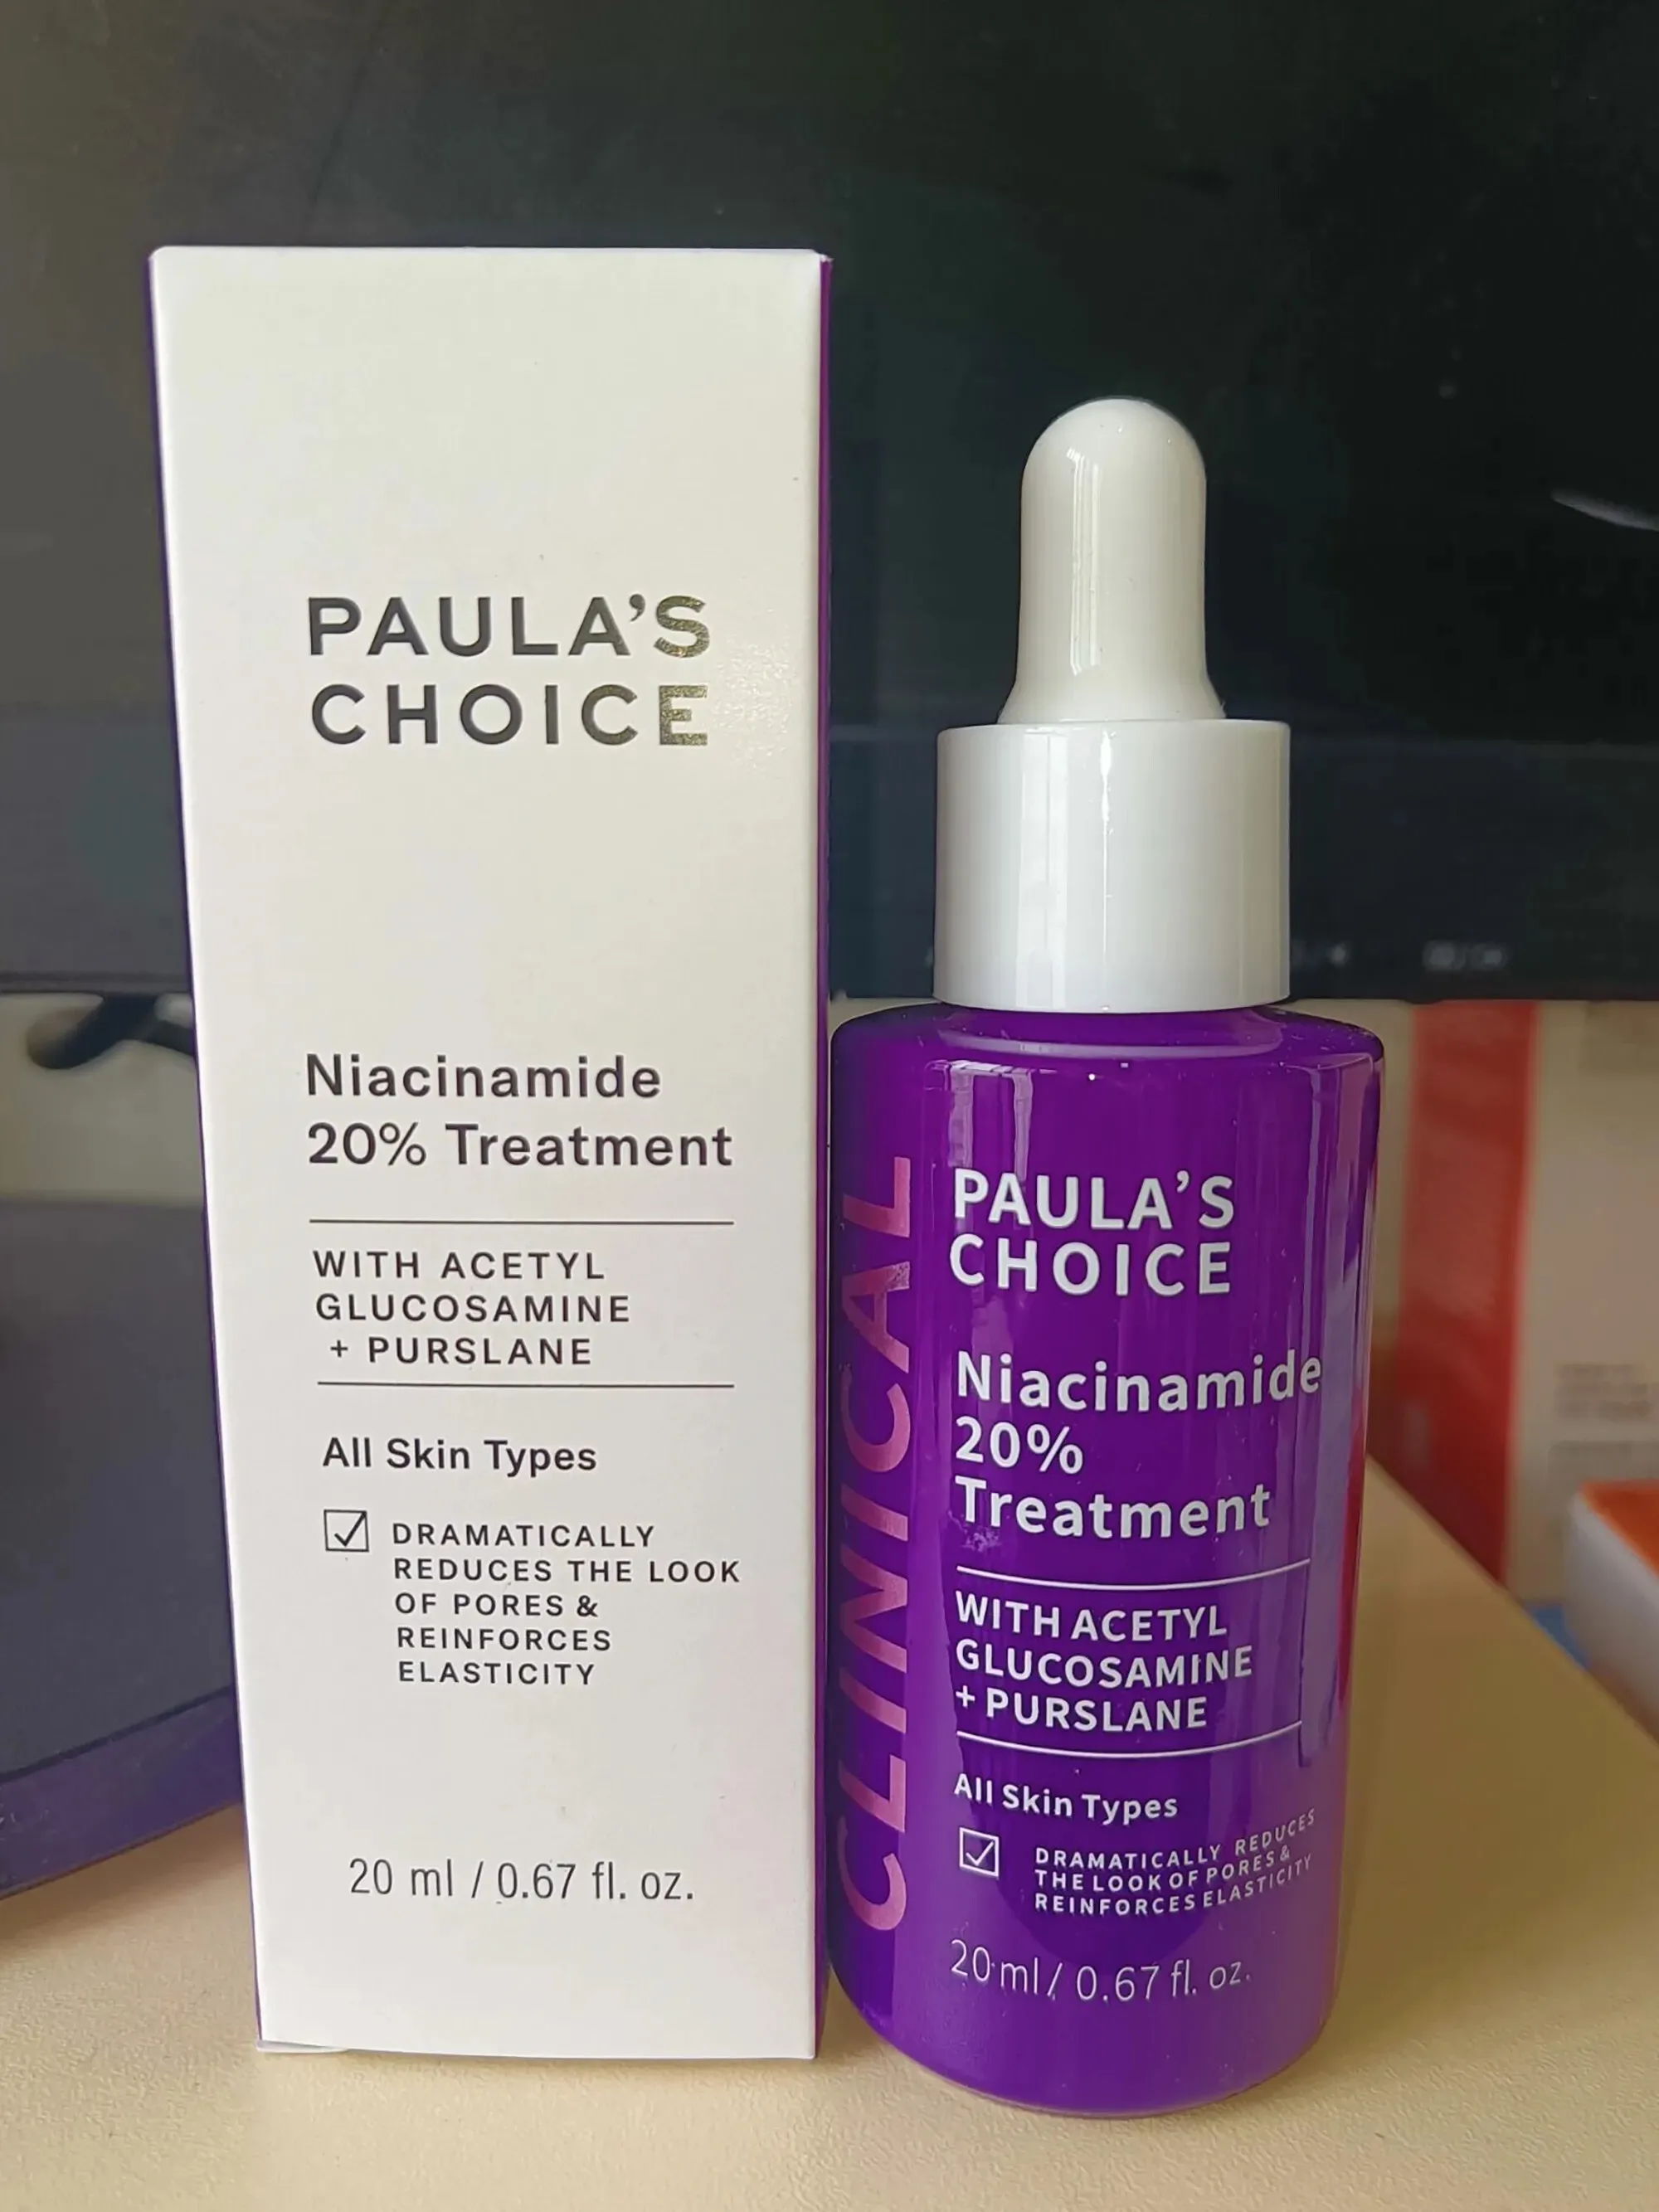 

New Arrive Paula‘s Choice Skin Care BOOST 10% Niacinamide Booster With Vitamin B3 and VC Serum Pore Minimize Face Makeup 20ml